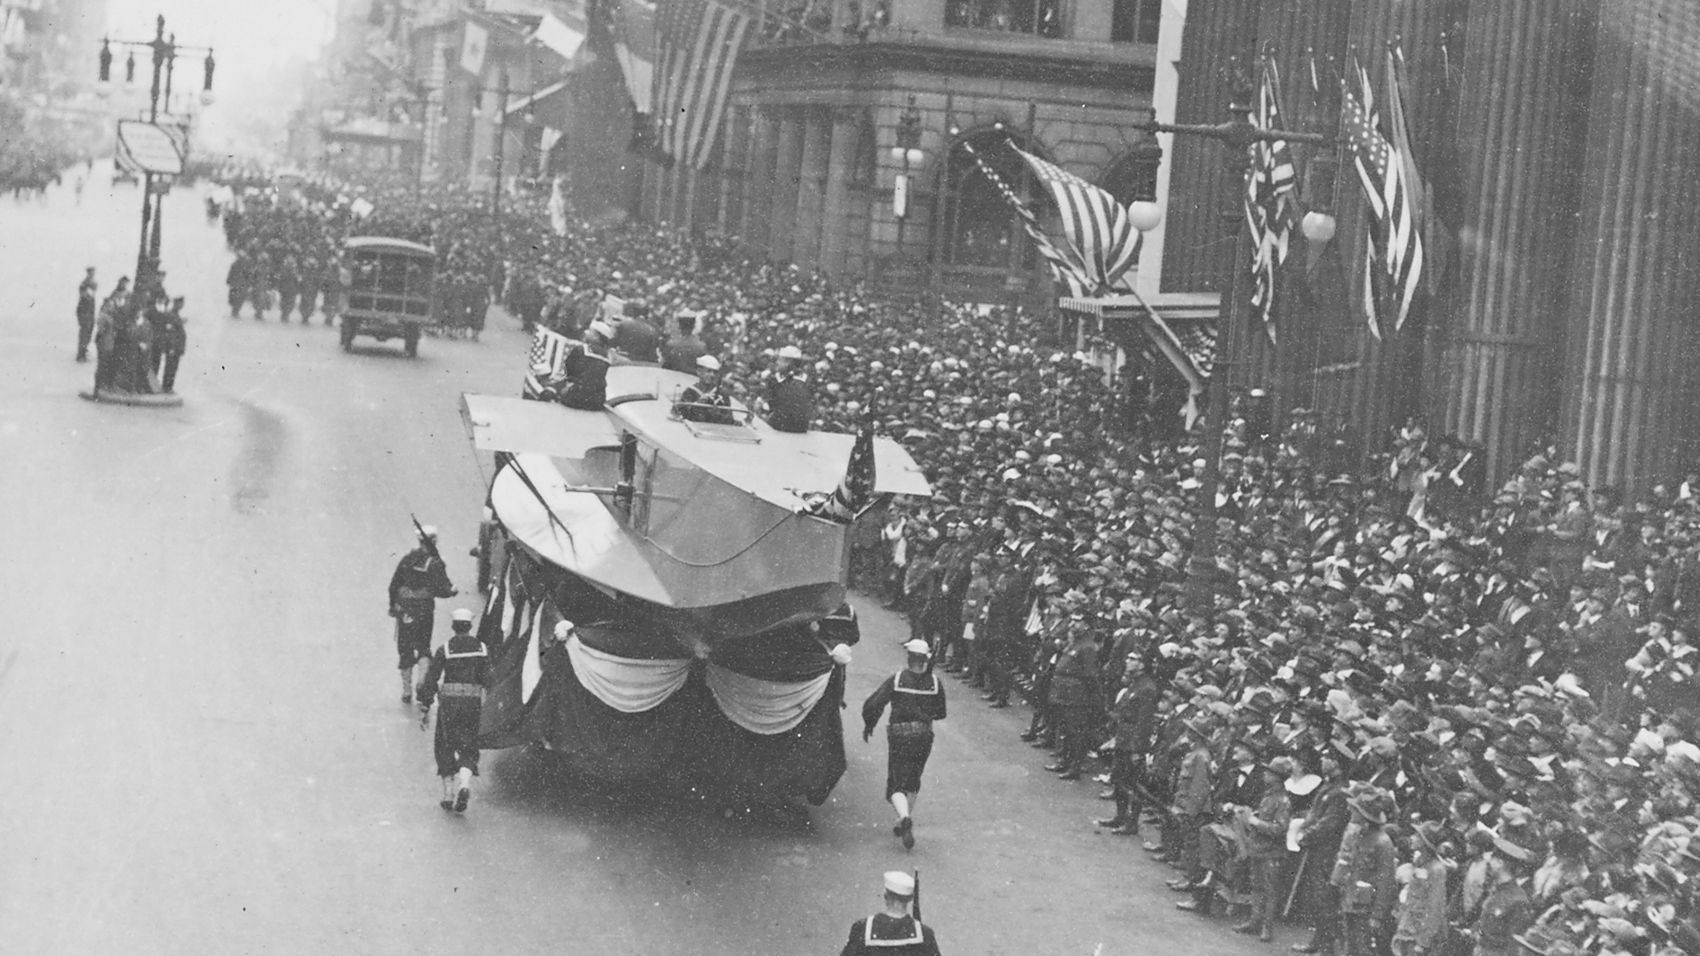 Historical photo of a parade down Broad Street